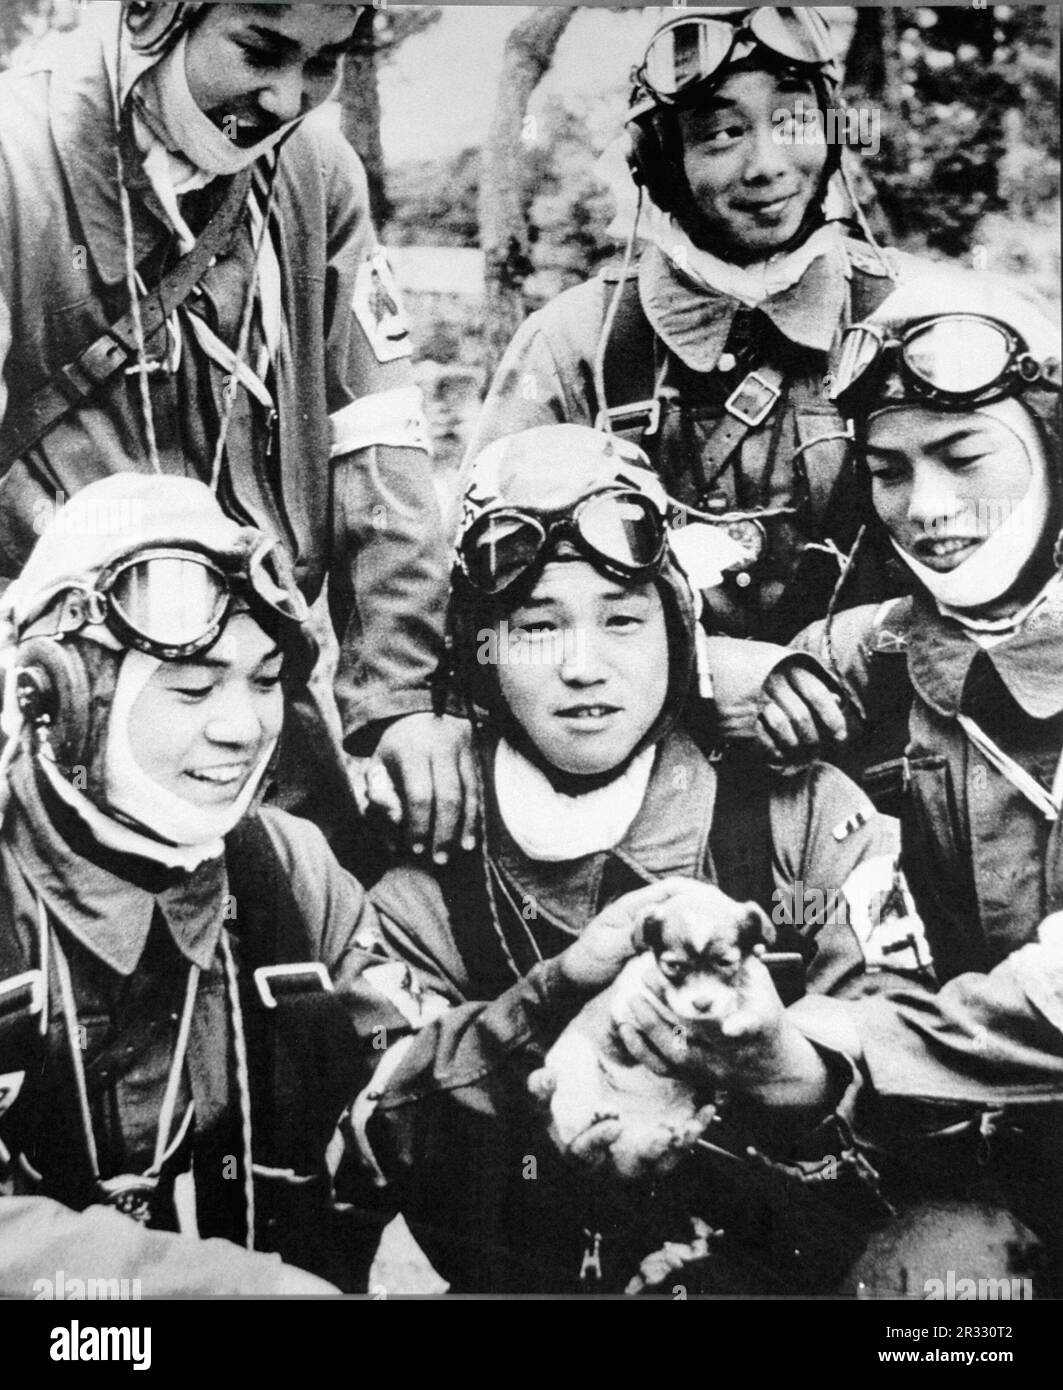 Members of 72nd Shinbu Squadron. Three of the five are 17 years old and the other two are 18 and 19 years old. The photo was taken the day before their mission. Left to right: front row Tsutomu Hayakawa, Yukio Araki, Takamasa Senda back row Kaname Takahashi, Mitsuyoshi Takahashi. Each of these young men were corporals. At 17, Yukio Araki (holding the dog) is the youngest known Kamikaze pilot to die in the war. Stock Photo